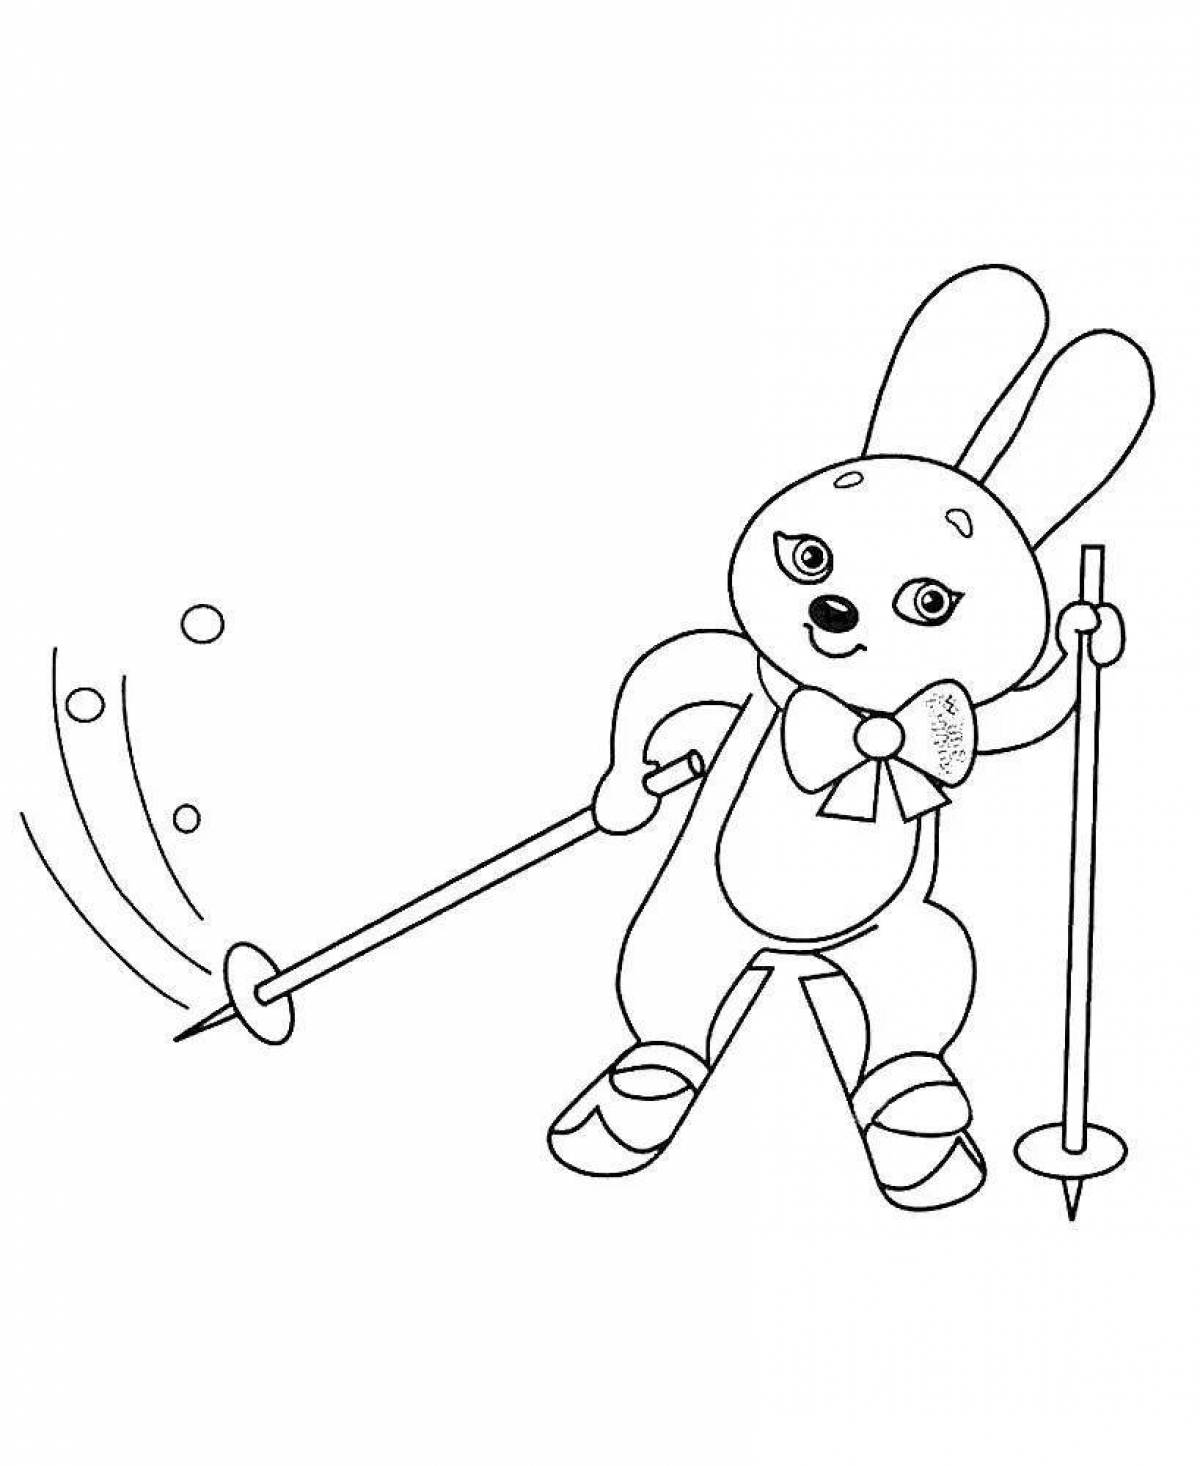 Fabulous olympic games coloring book for kids